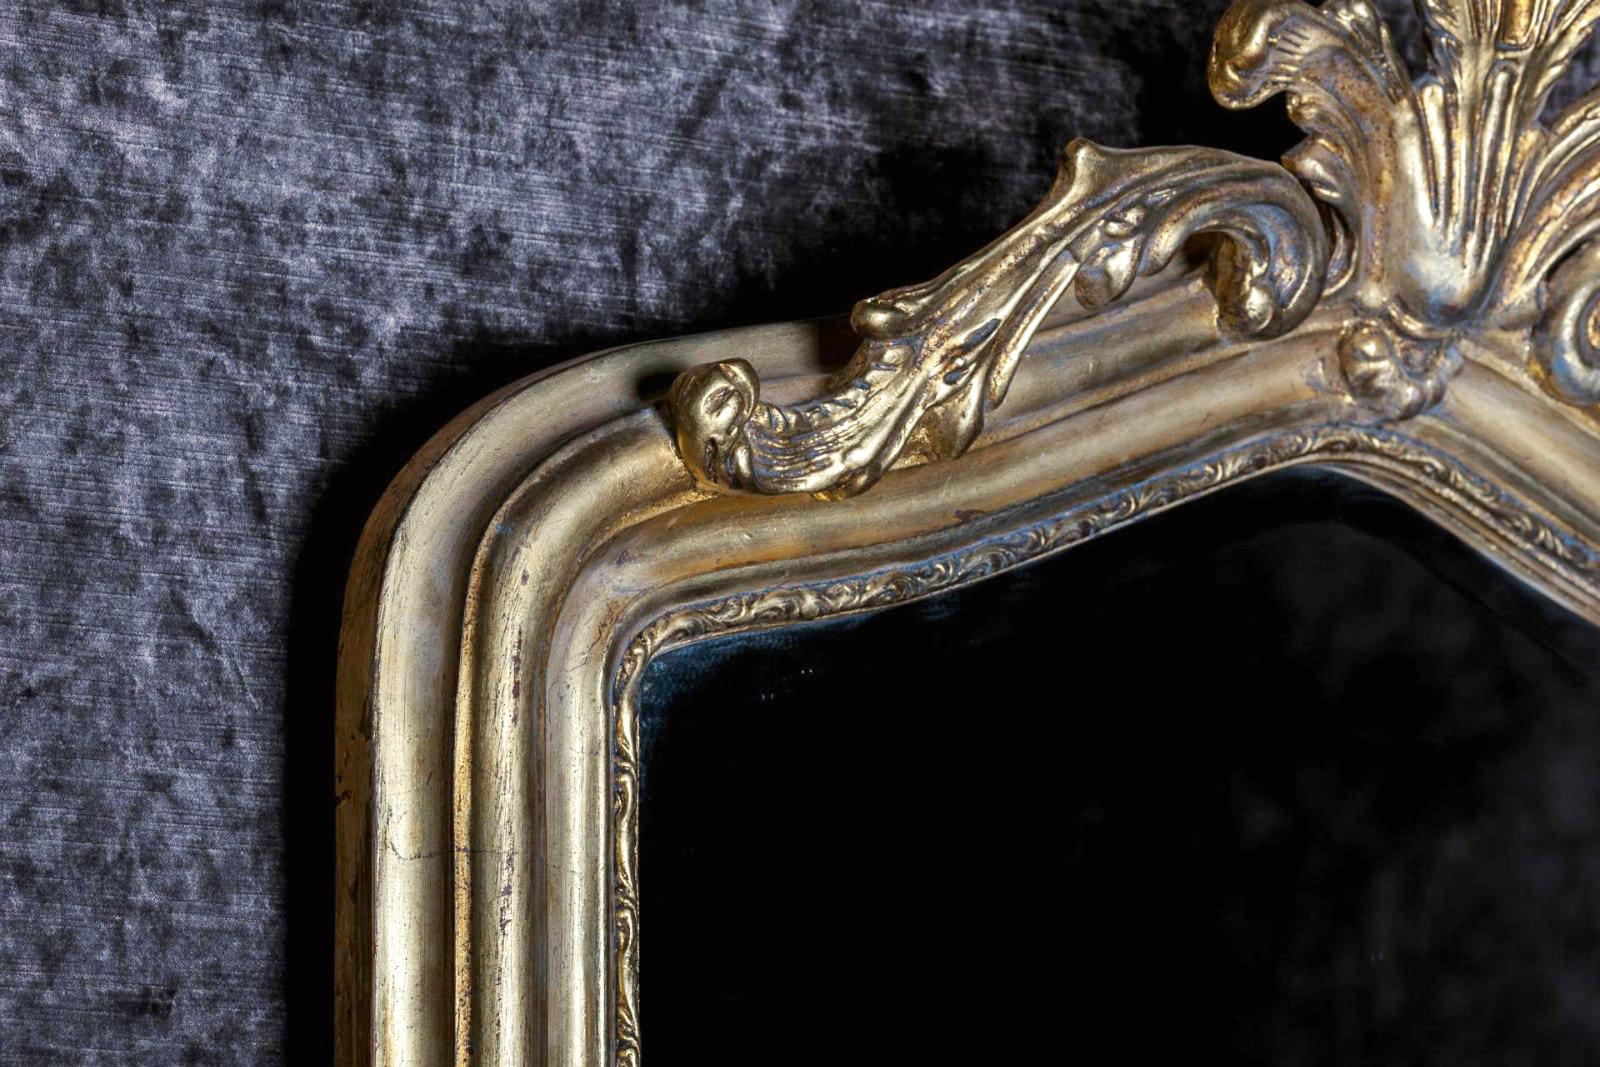 This French hand carved beveled mirror in hand gilt frame was hand carved with beaded detail and an exquisite aged gilt painting technique. The piece itself was created in Biarritz, France, and has a lovely beveled edge mirror installed. The subject